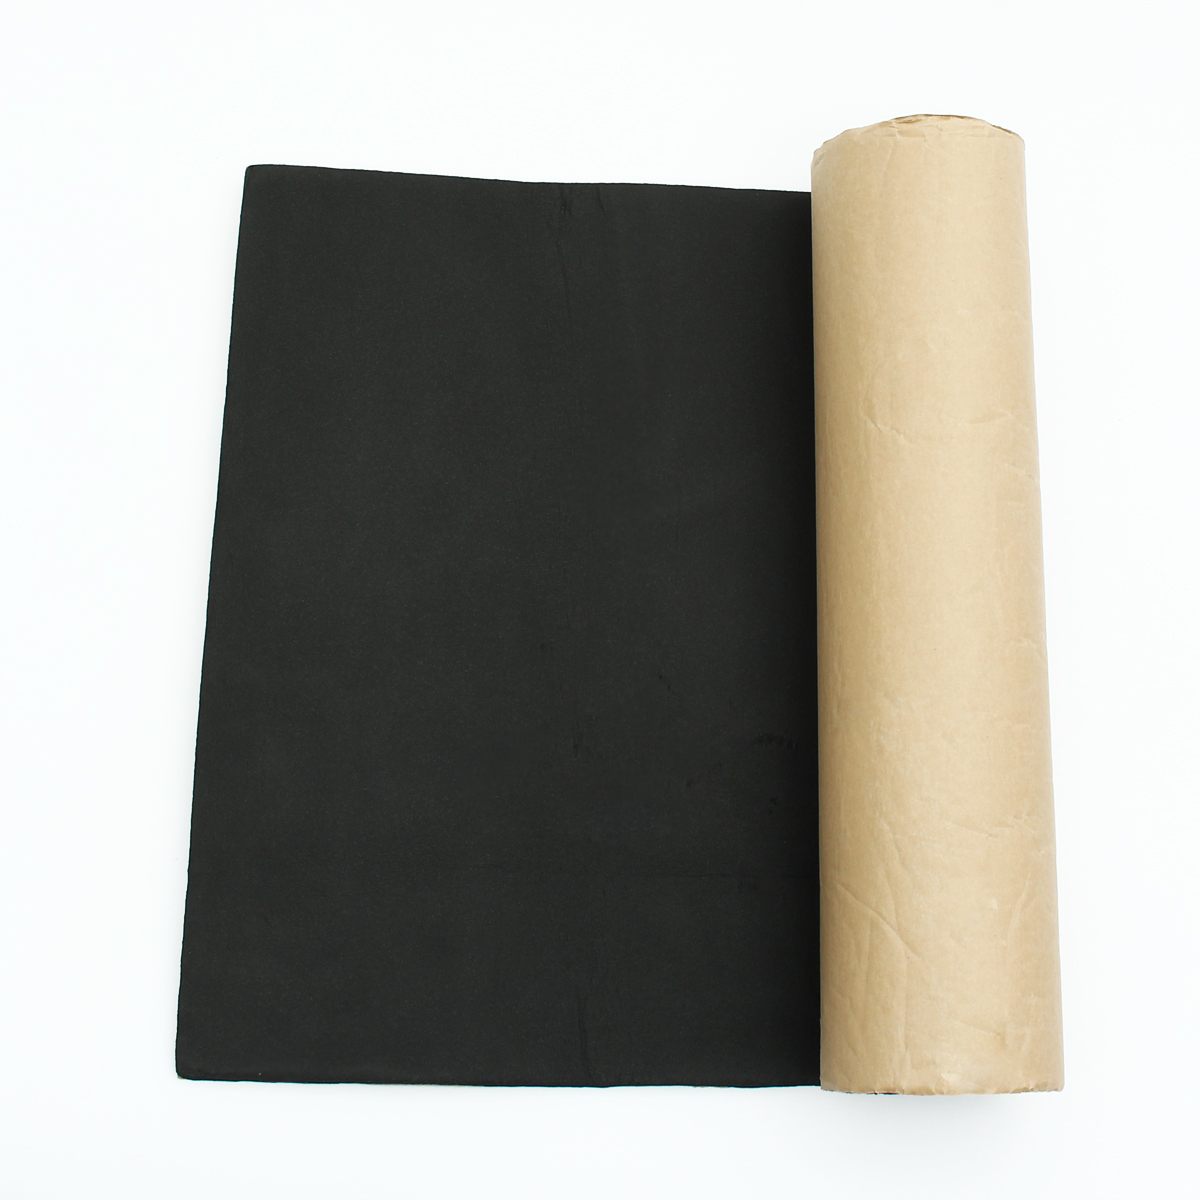 

1 Roll 100 x 50cm Rubber Sound Proofing & Heat Insulation Sheet Vehicle Closed Cell Soundproof Foam